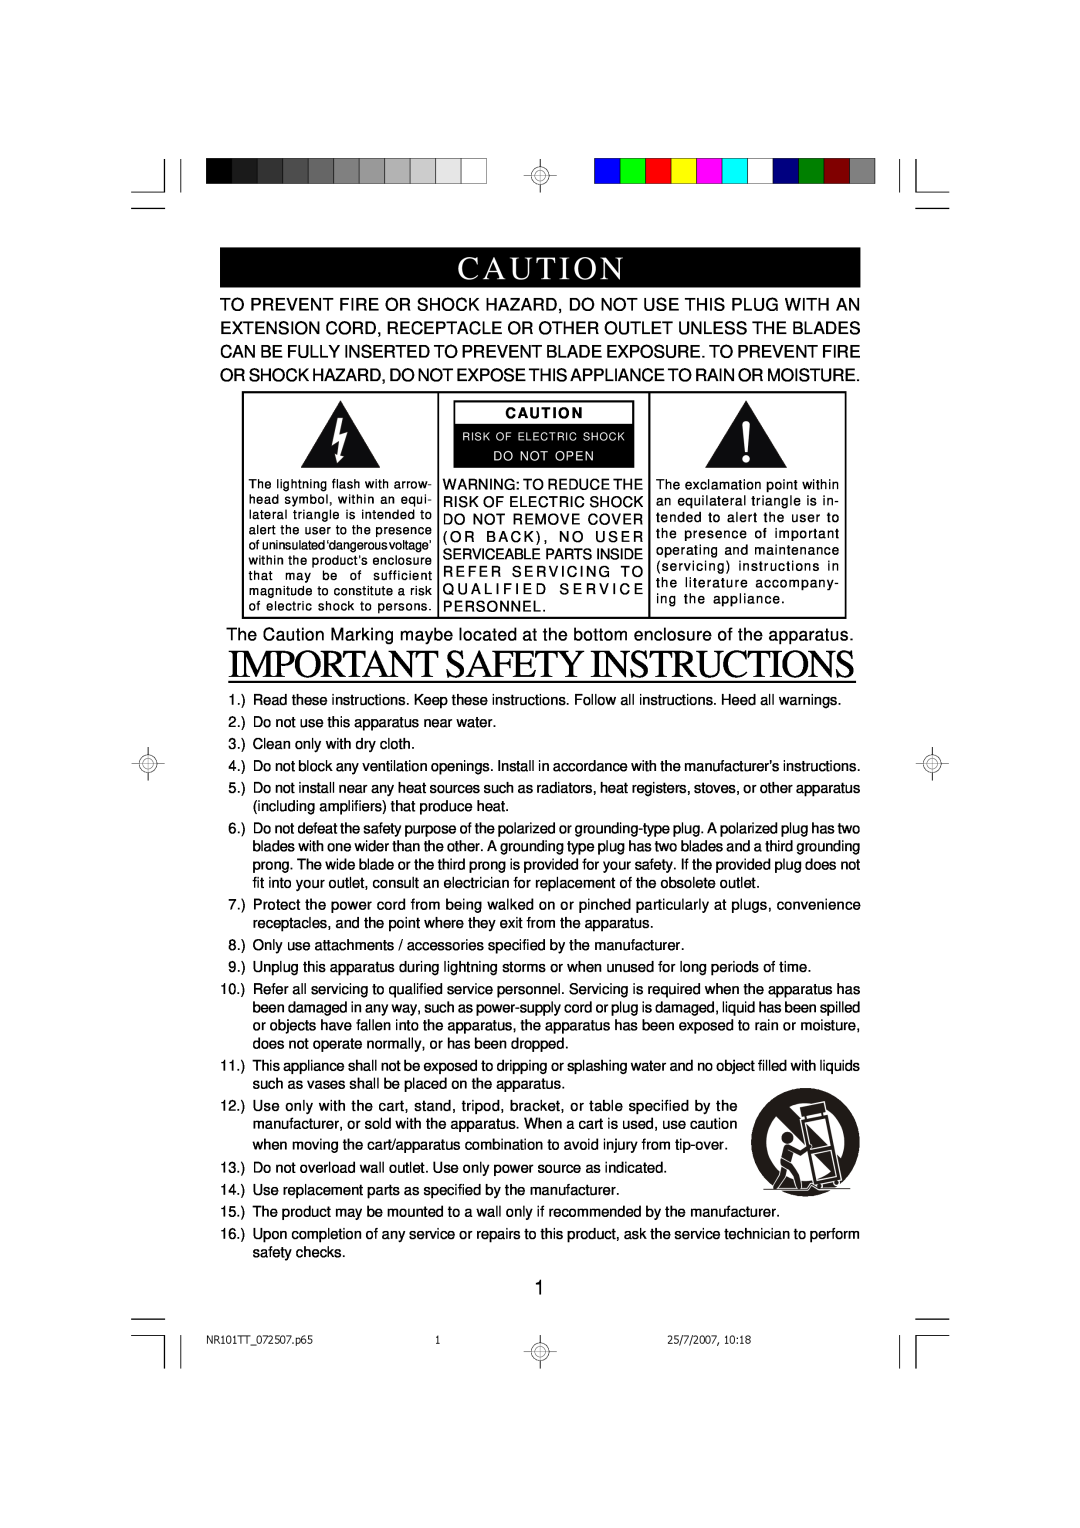 Emerson NR101TT owner manual Important Safety Instructions, Caut I On, Caut I O N 